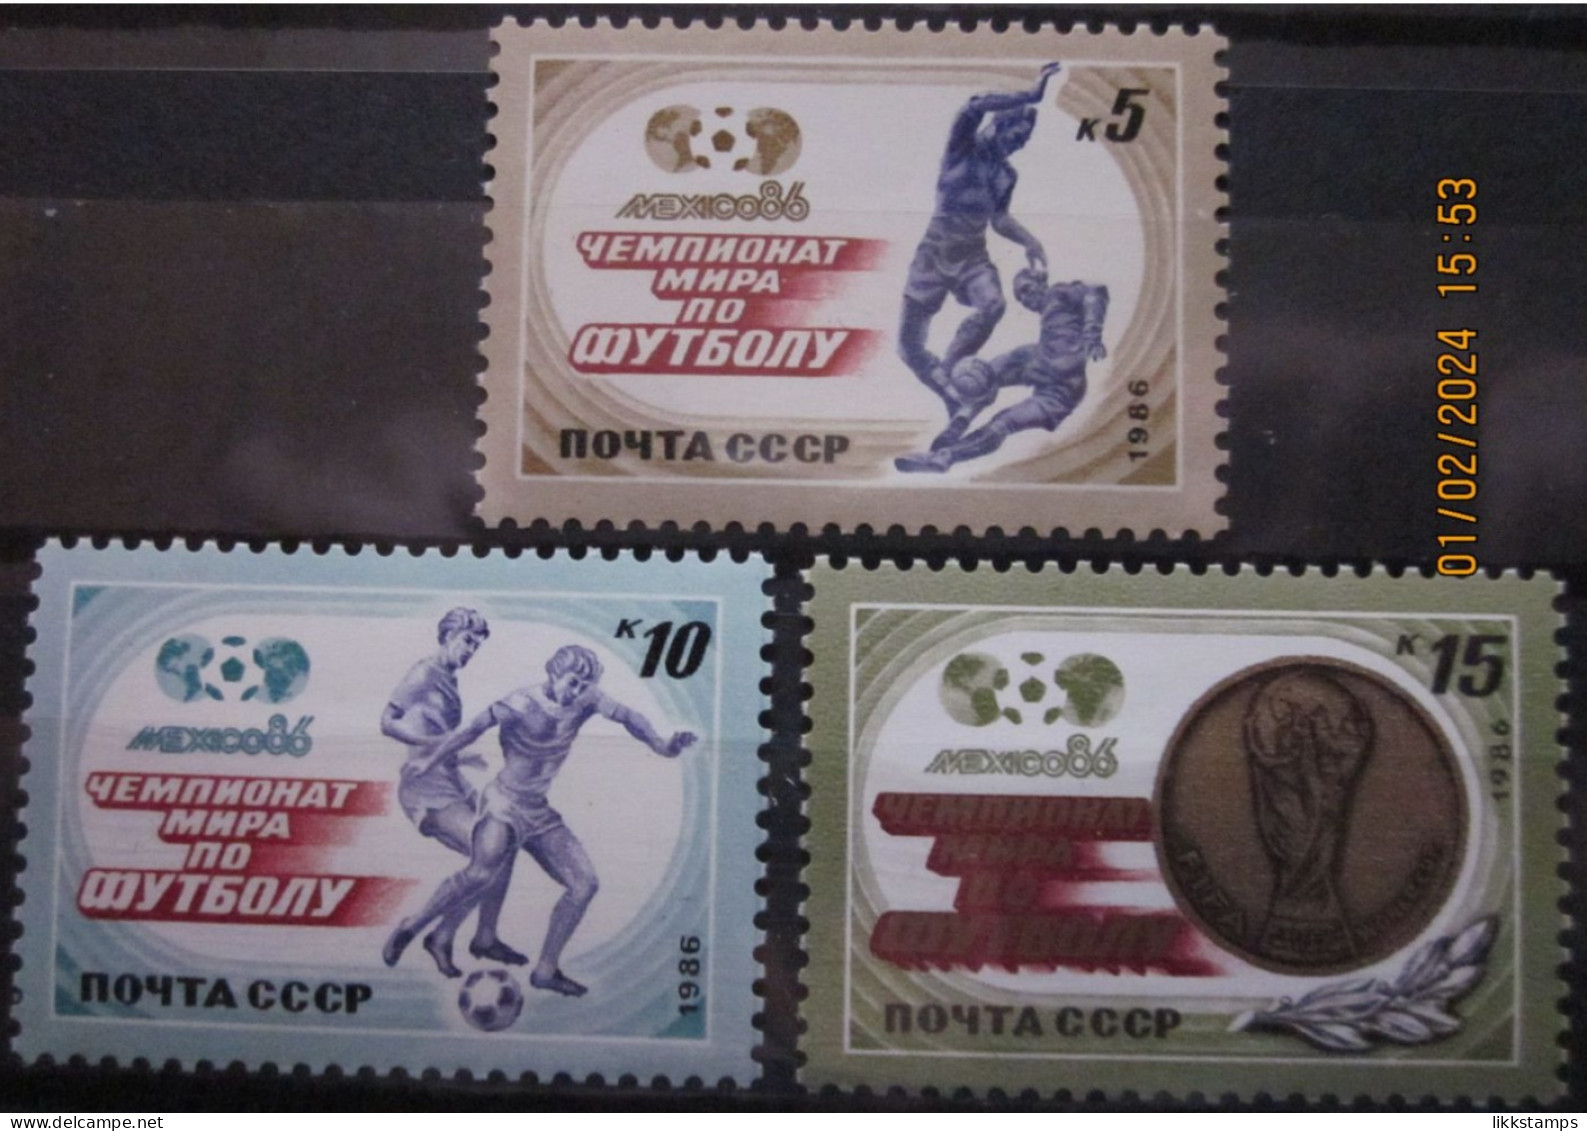 RUSSIA ~ 1986 ~ S.G. NUMBERS 5660 - 5662, ~ 'LOT C' ~ FOOTBALL. ~ MNH #03645 - Neufs